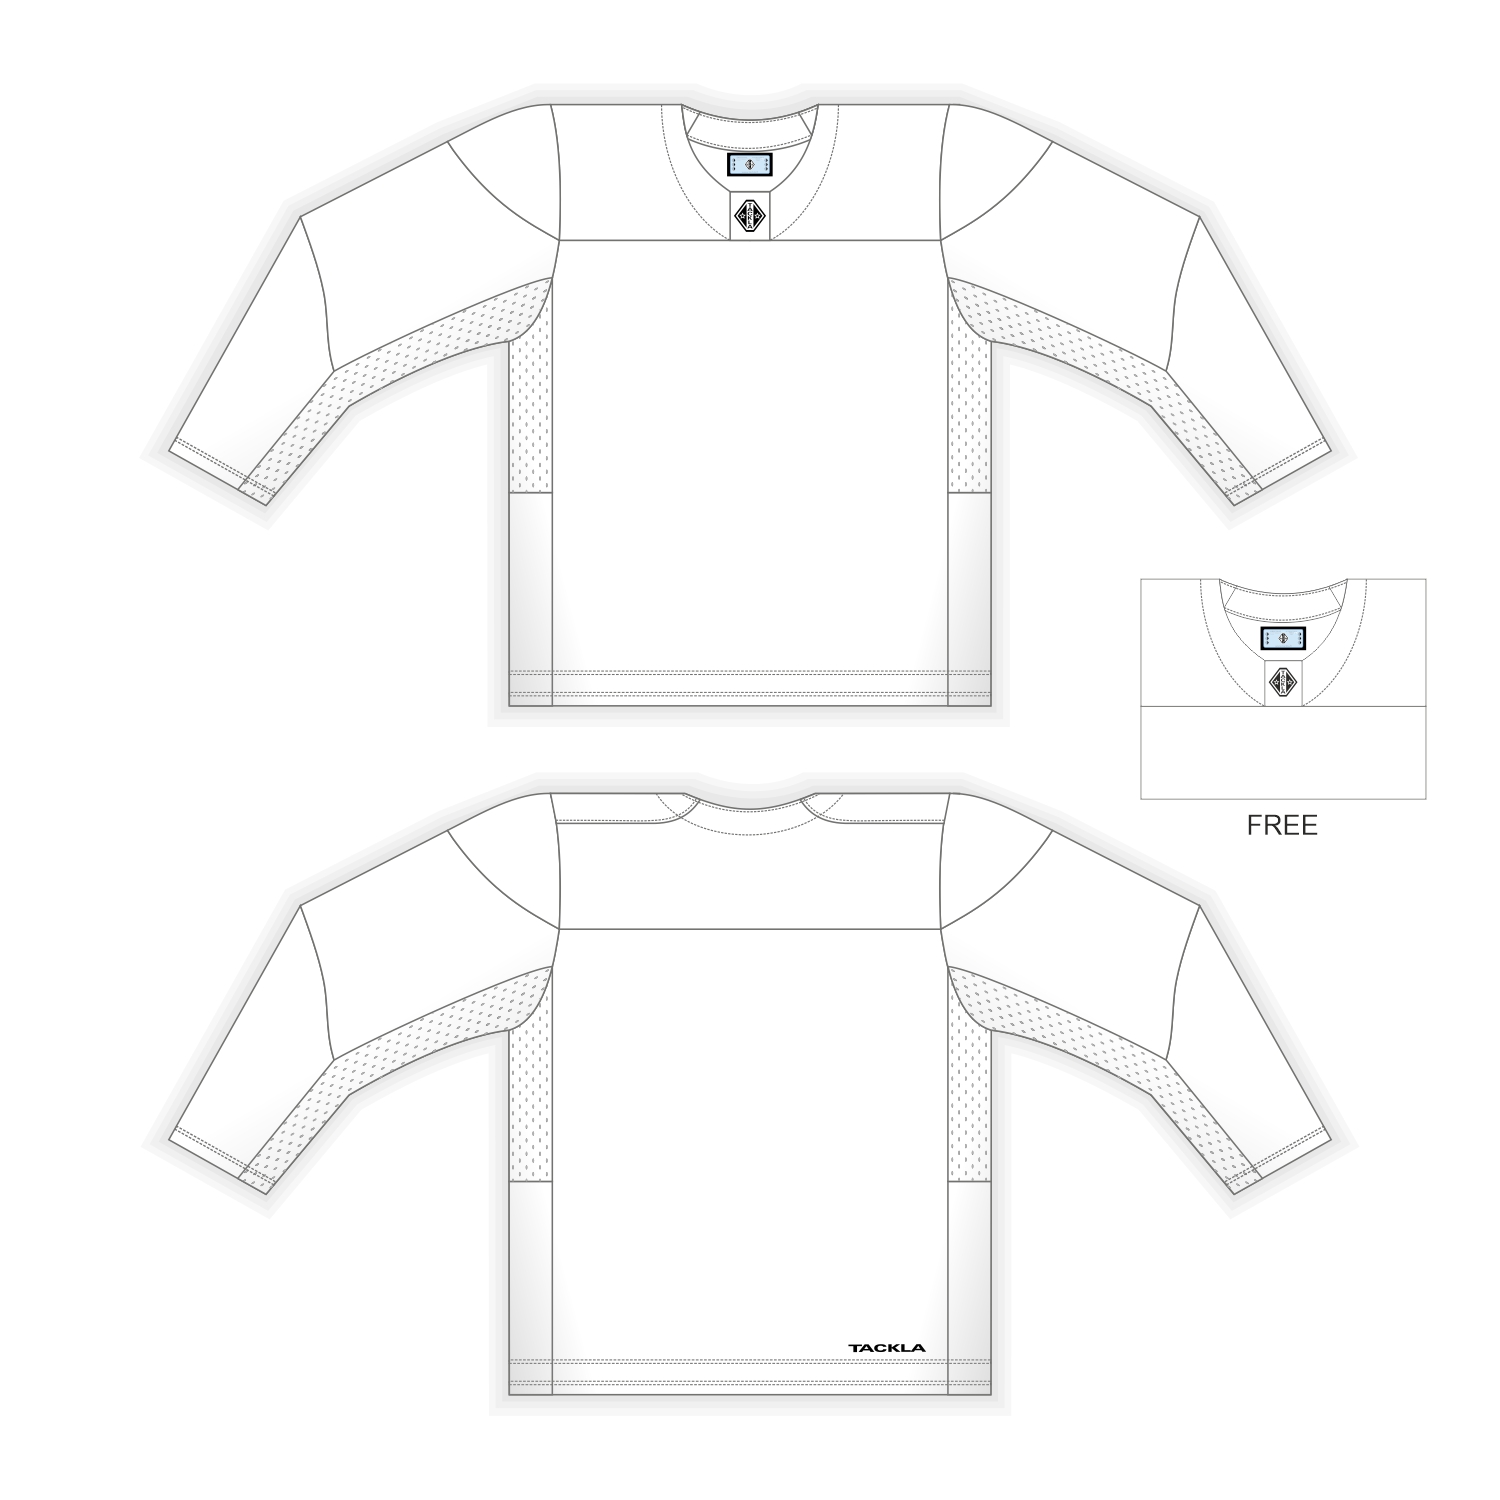 Hockey Blank Jersey Template Vector Images (28)